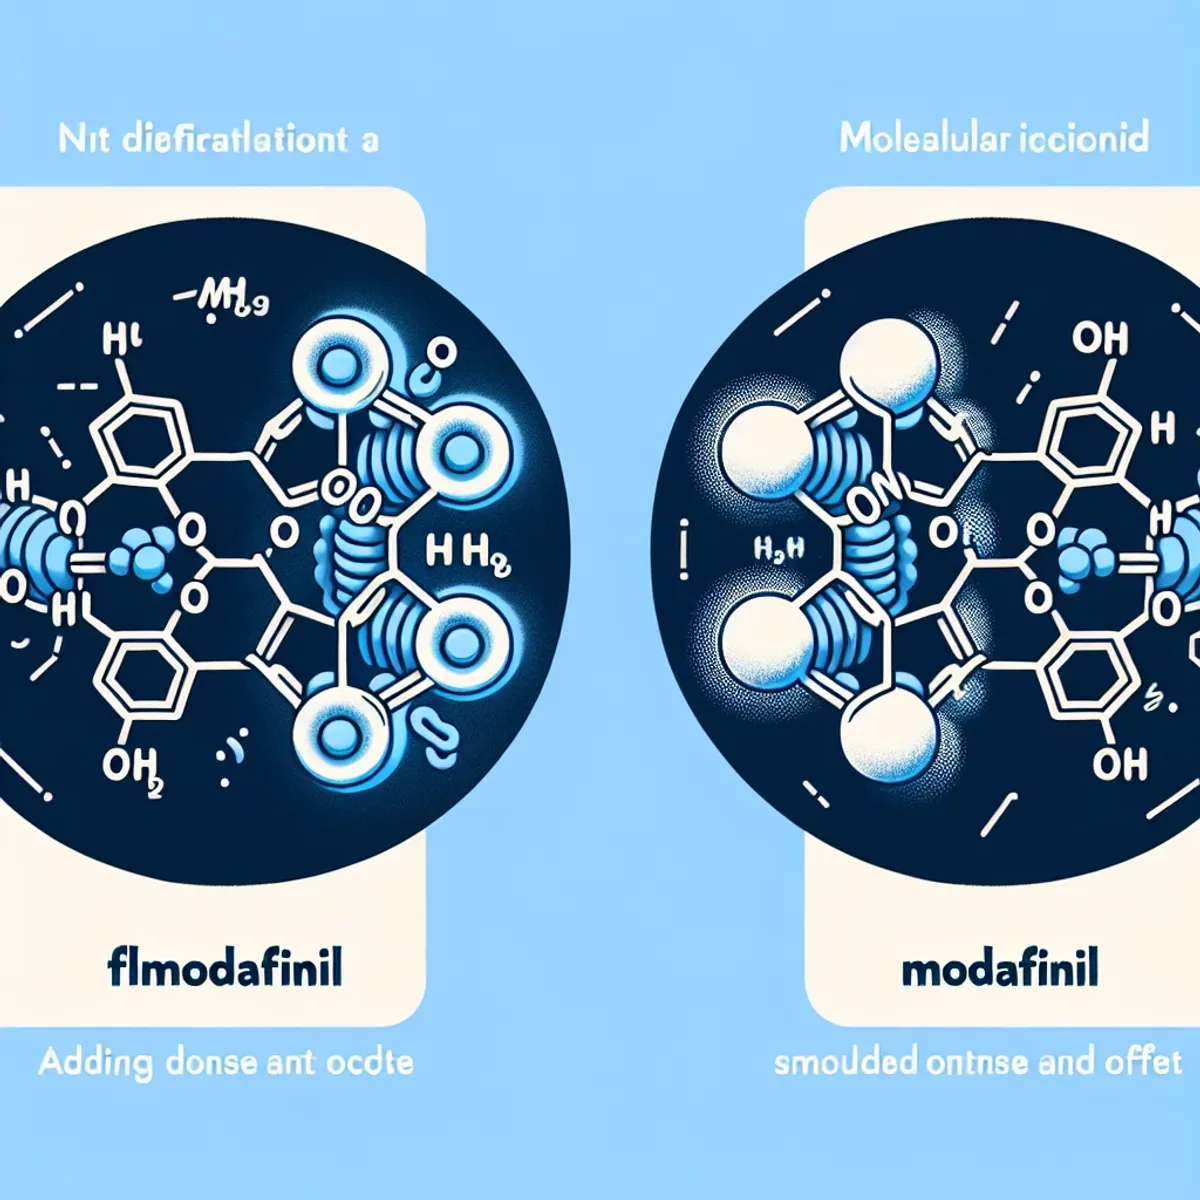 A comparison of molecular structures for Flmodafinil and Modafinil, with smoother lines for Flmodafinil and more abrupt lines for Modafinil.